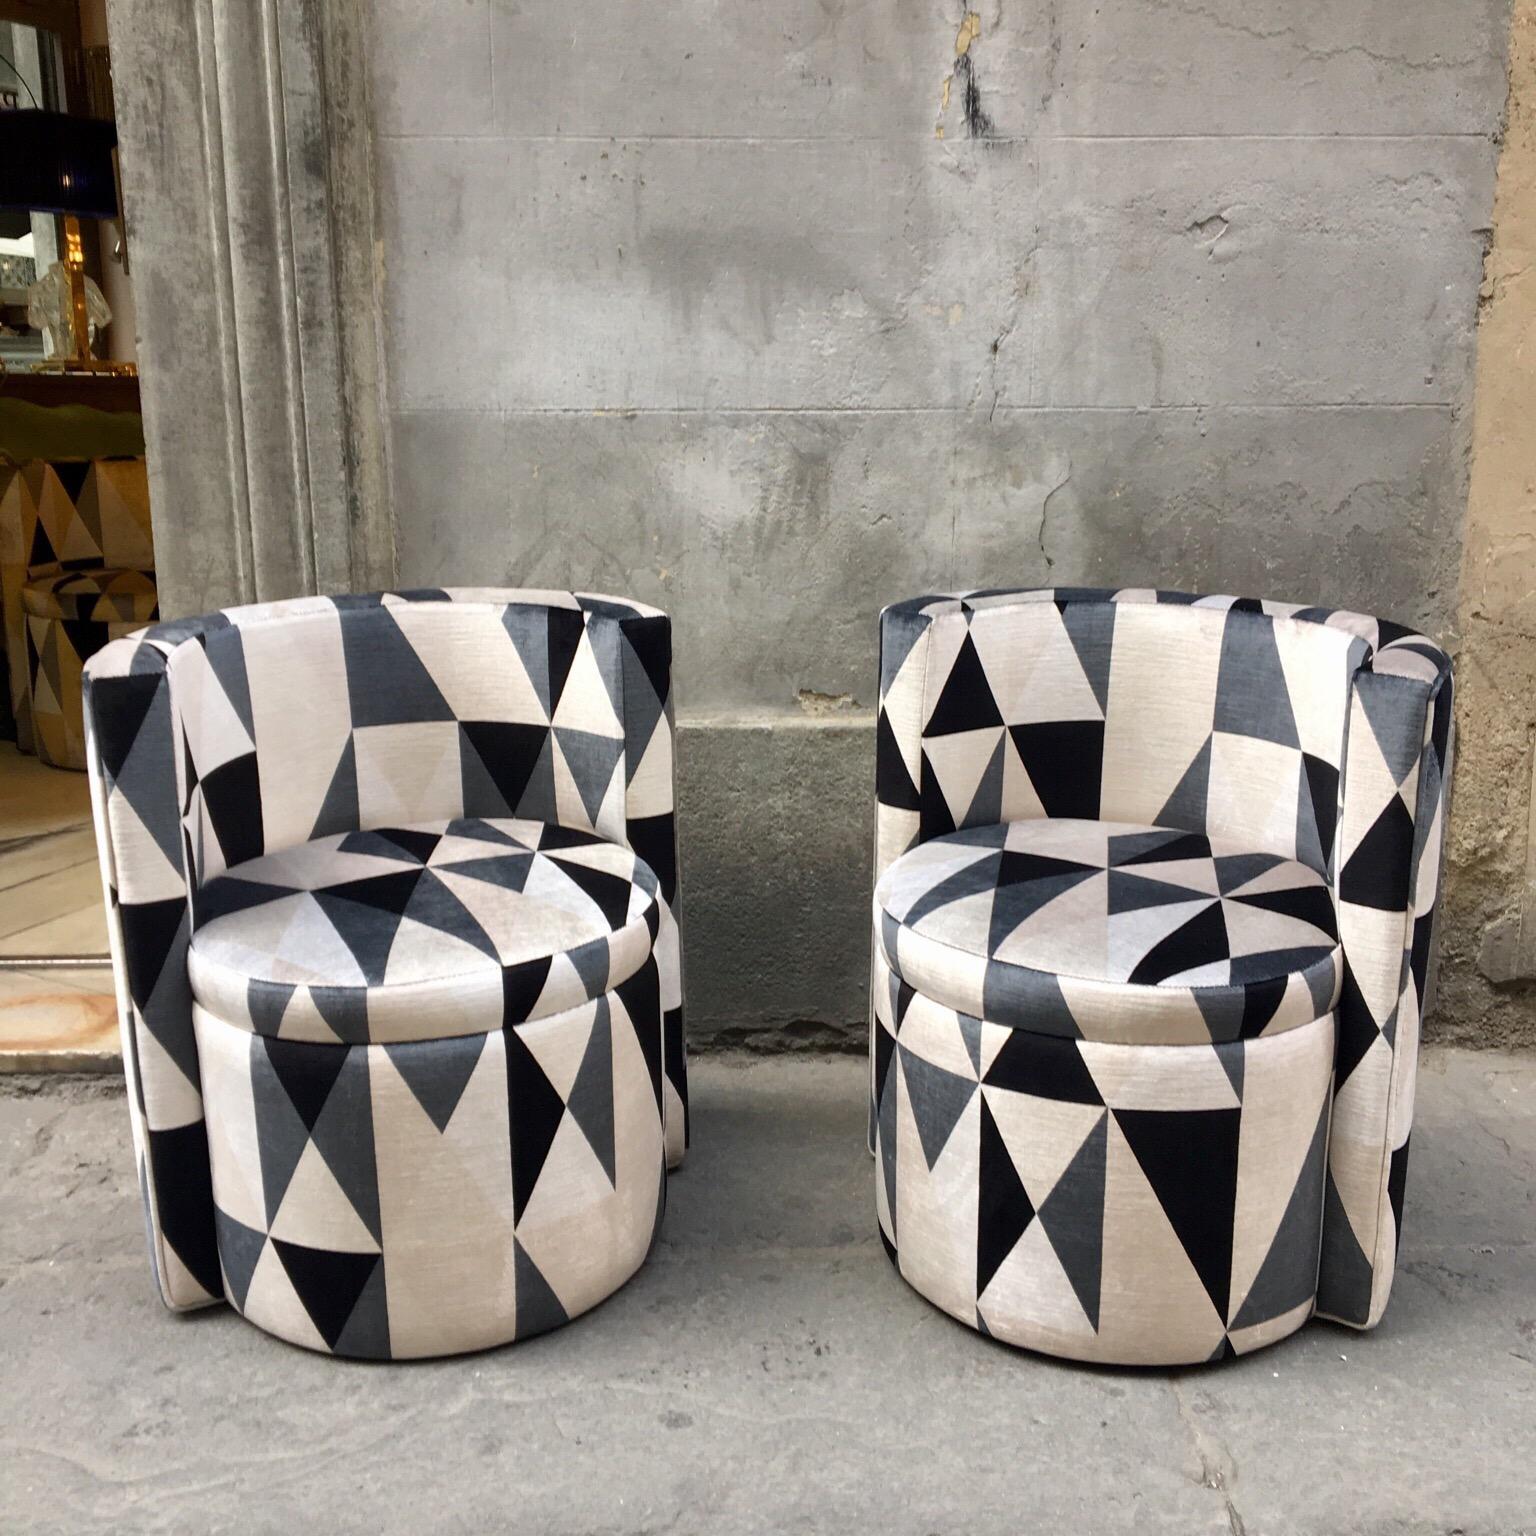 Pair of round club chairs with Kirkby velvet fabric. The chairs are from Art Deco era to midcentury but they are newly upholstered with Kirkby geometric velvet in grey, cream and black colors.